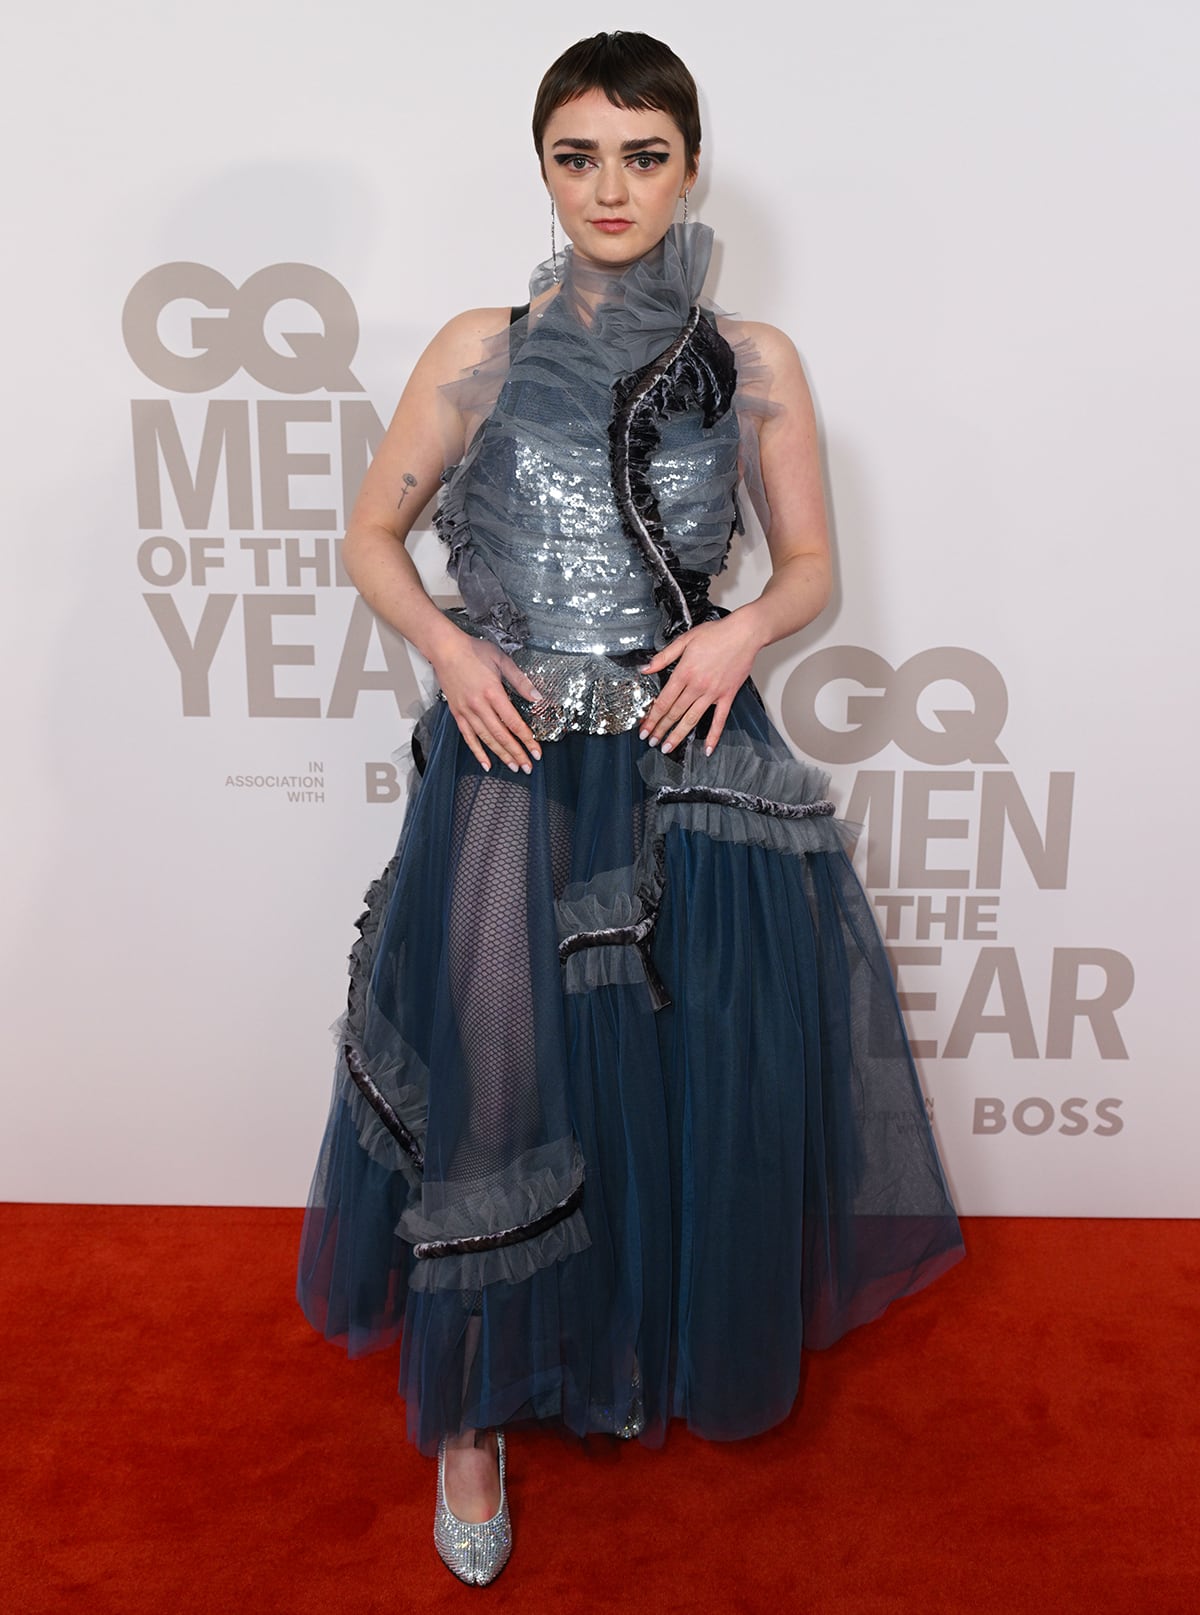 Maisie Williams pulls off her botched arts and crafts project look featuring a deconstructed blue and gray tulle gown from Maison Margiela's Co-Ed 2023 collection